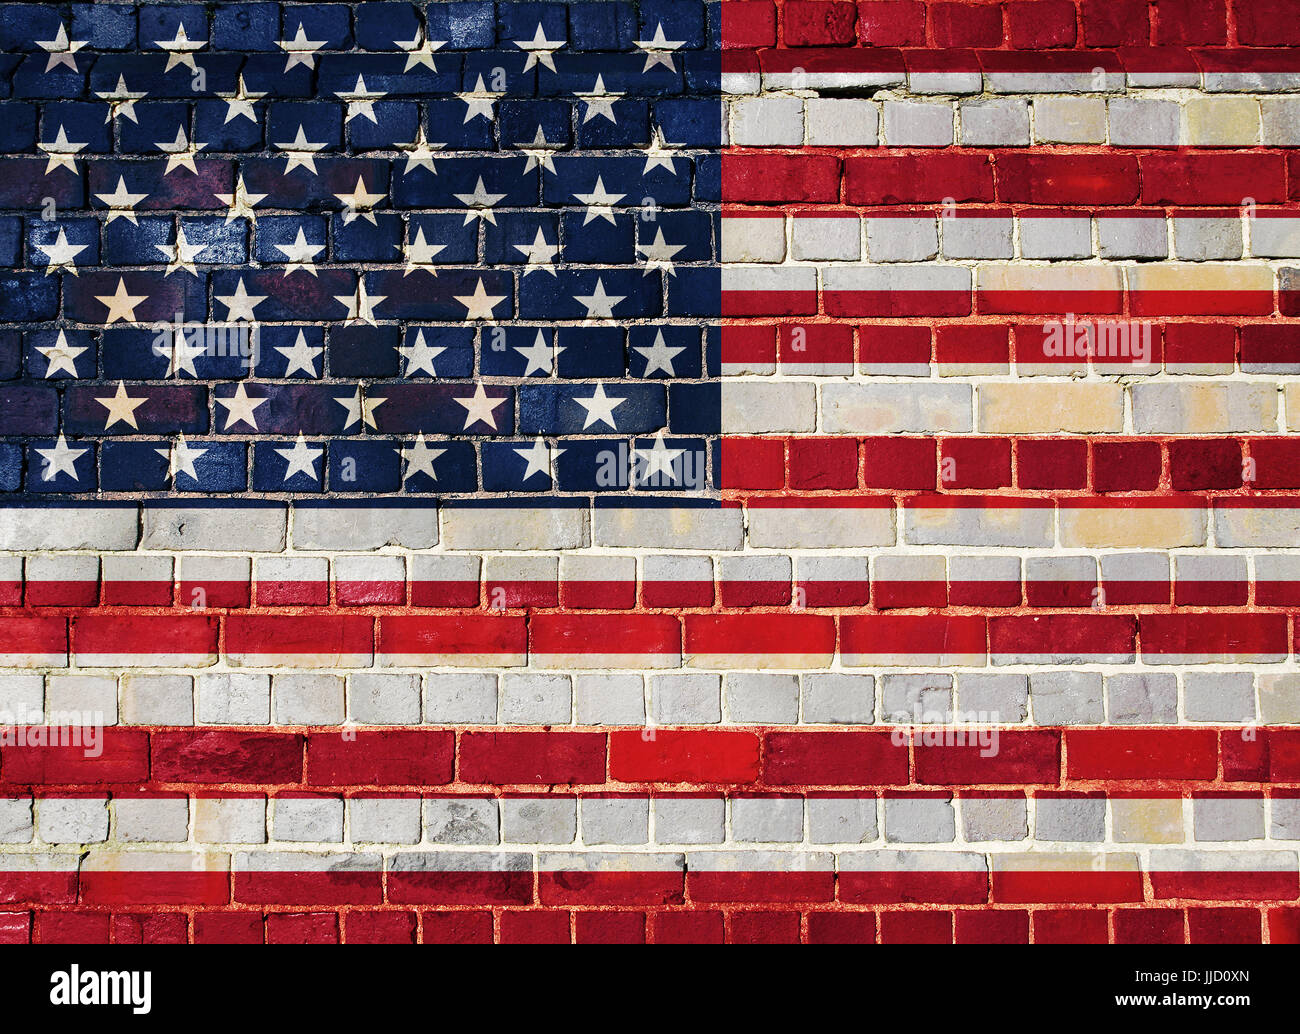 United States of America flag on an old brick wall background Stock Photo